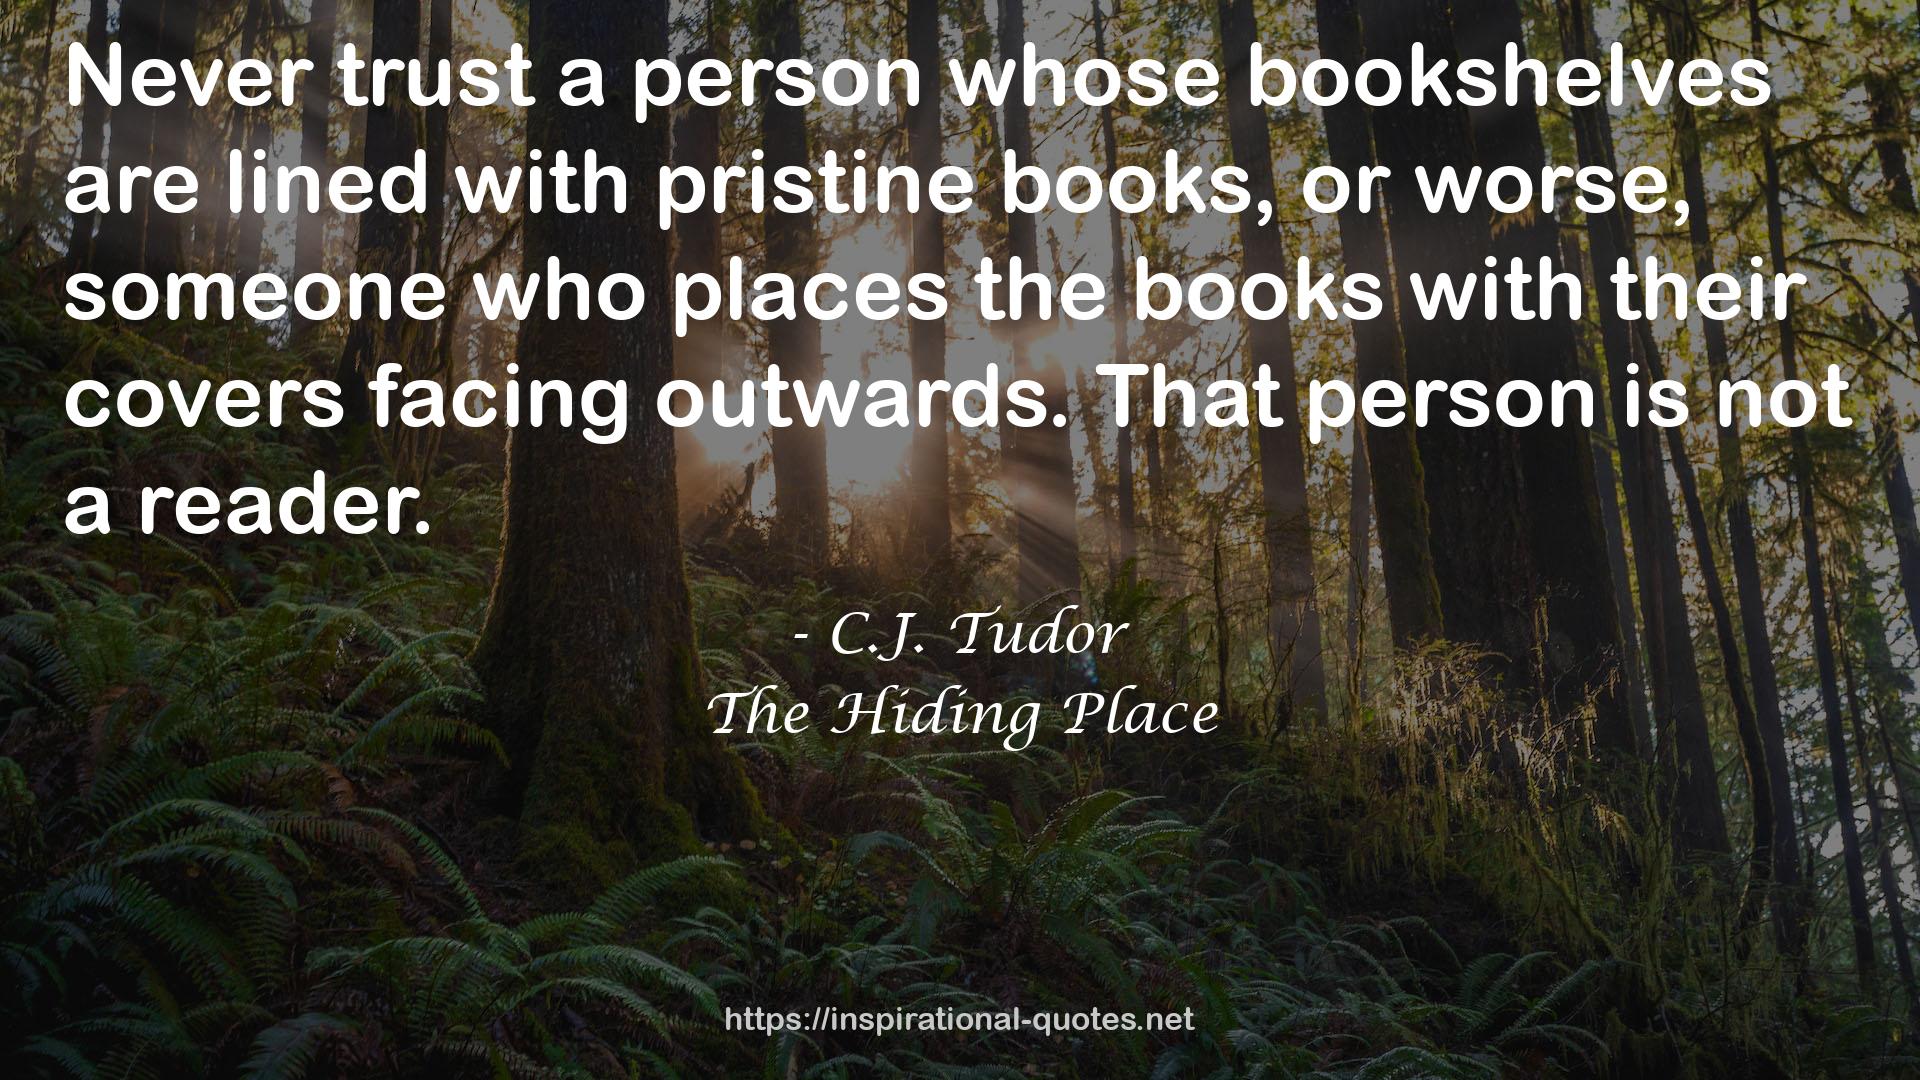 The Hiding Place QUOTES